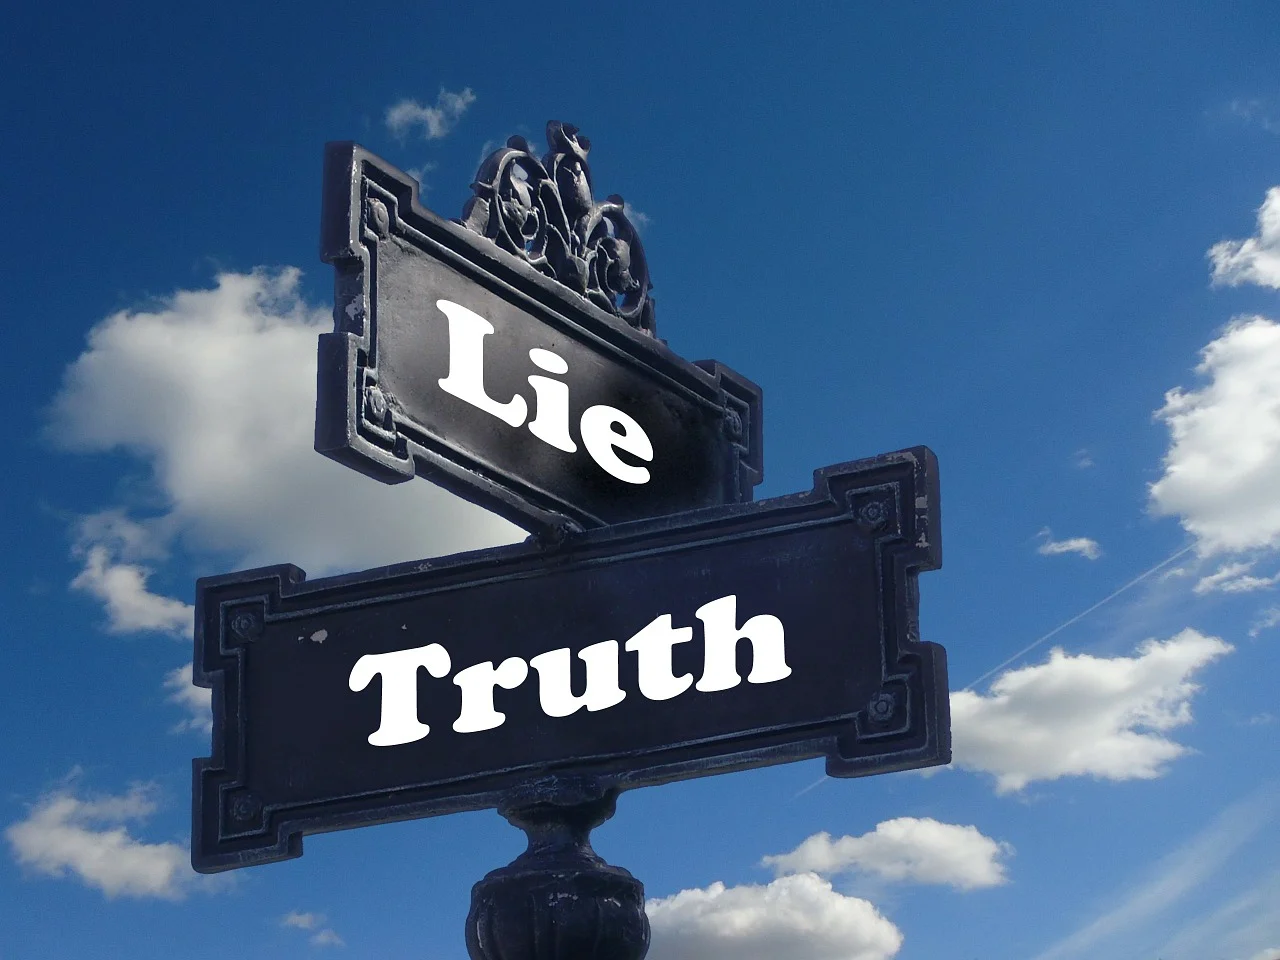 Street signs that say "lie" and "truth."